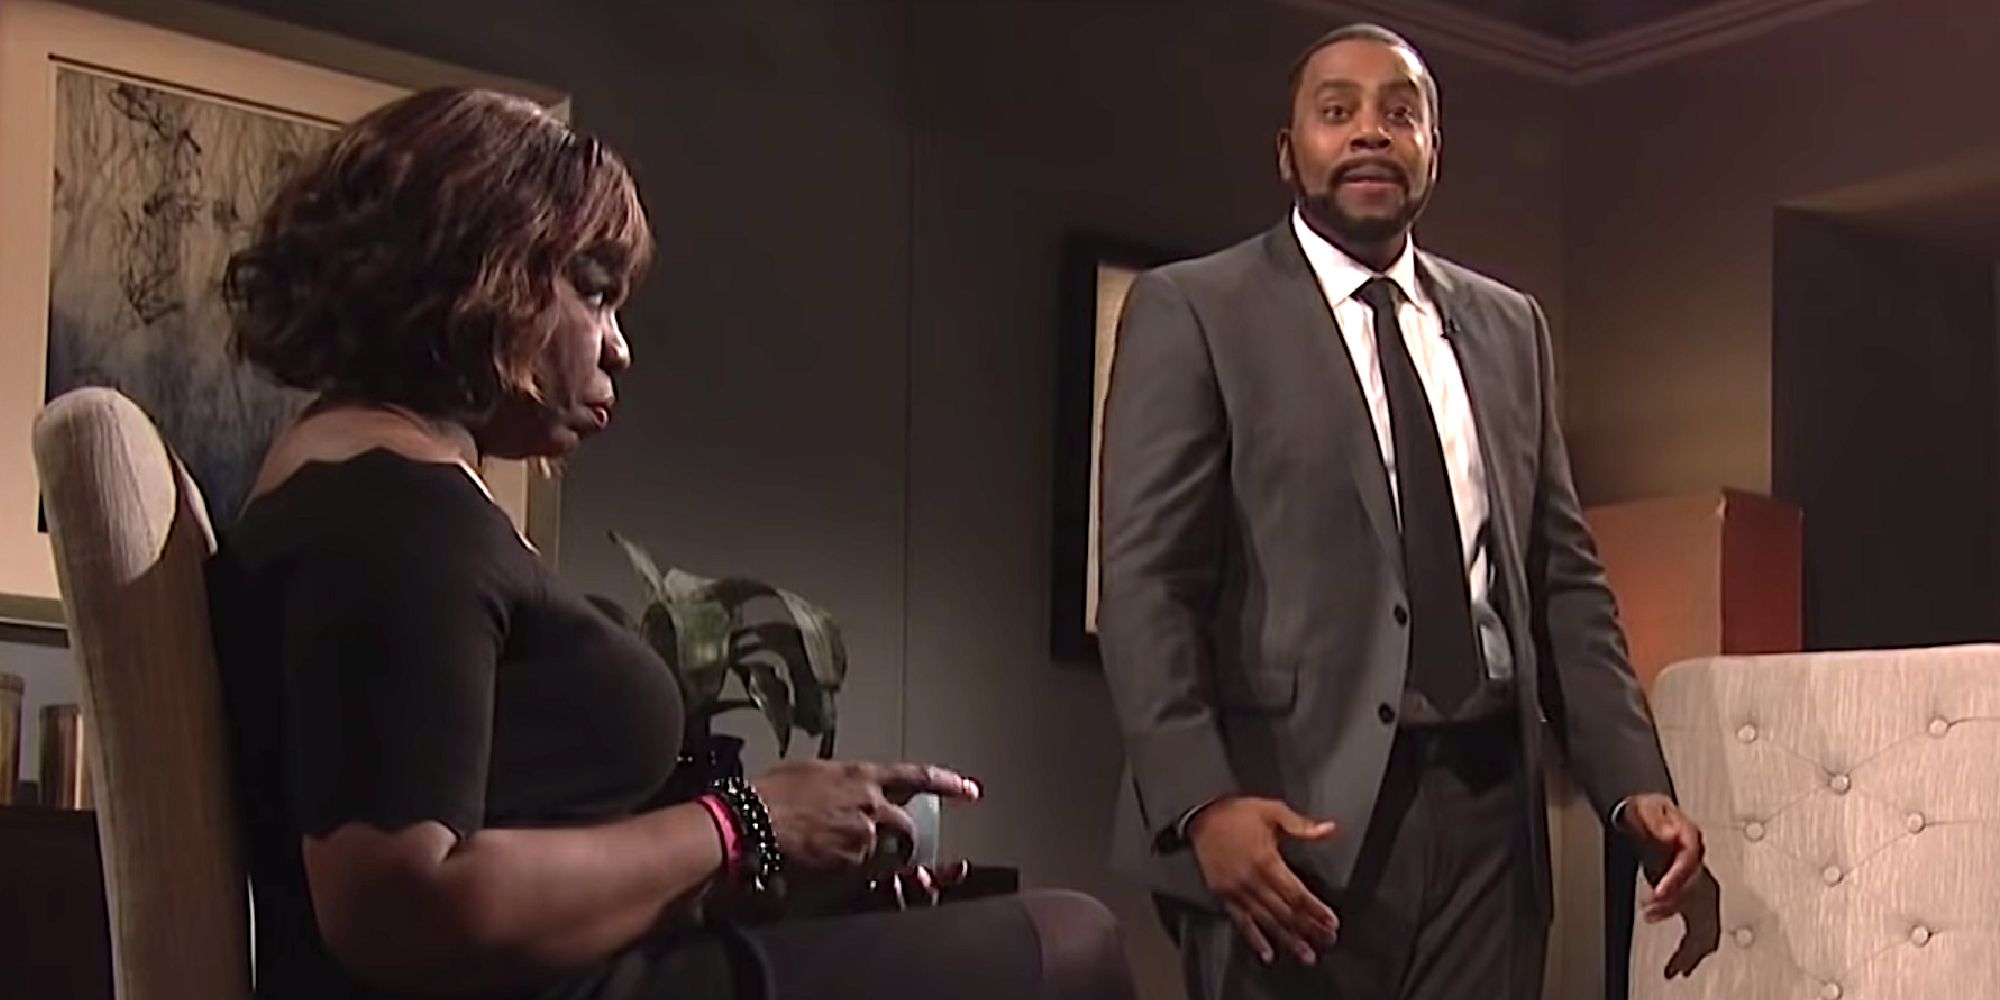 Kenan as R. Kelly standing up mid-interview with Leslie Jones as Gayle King